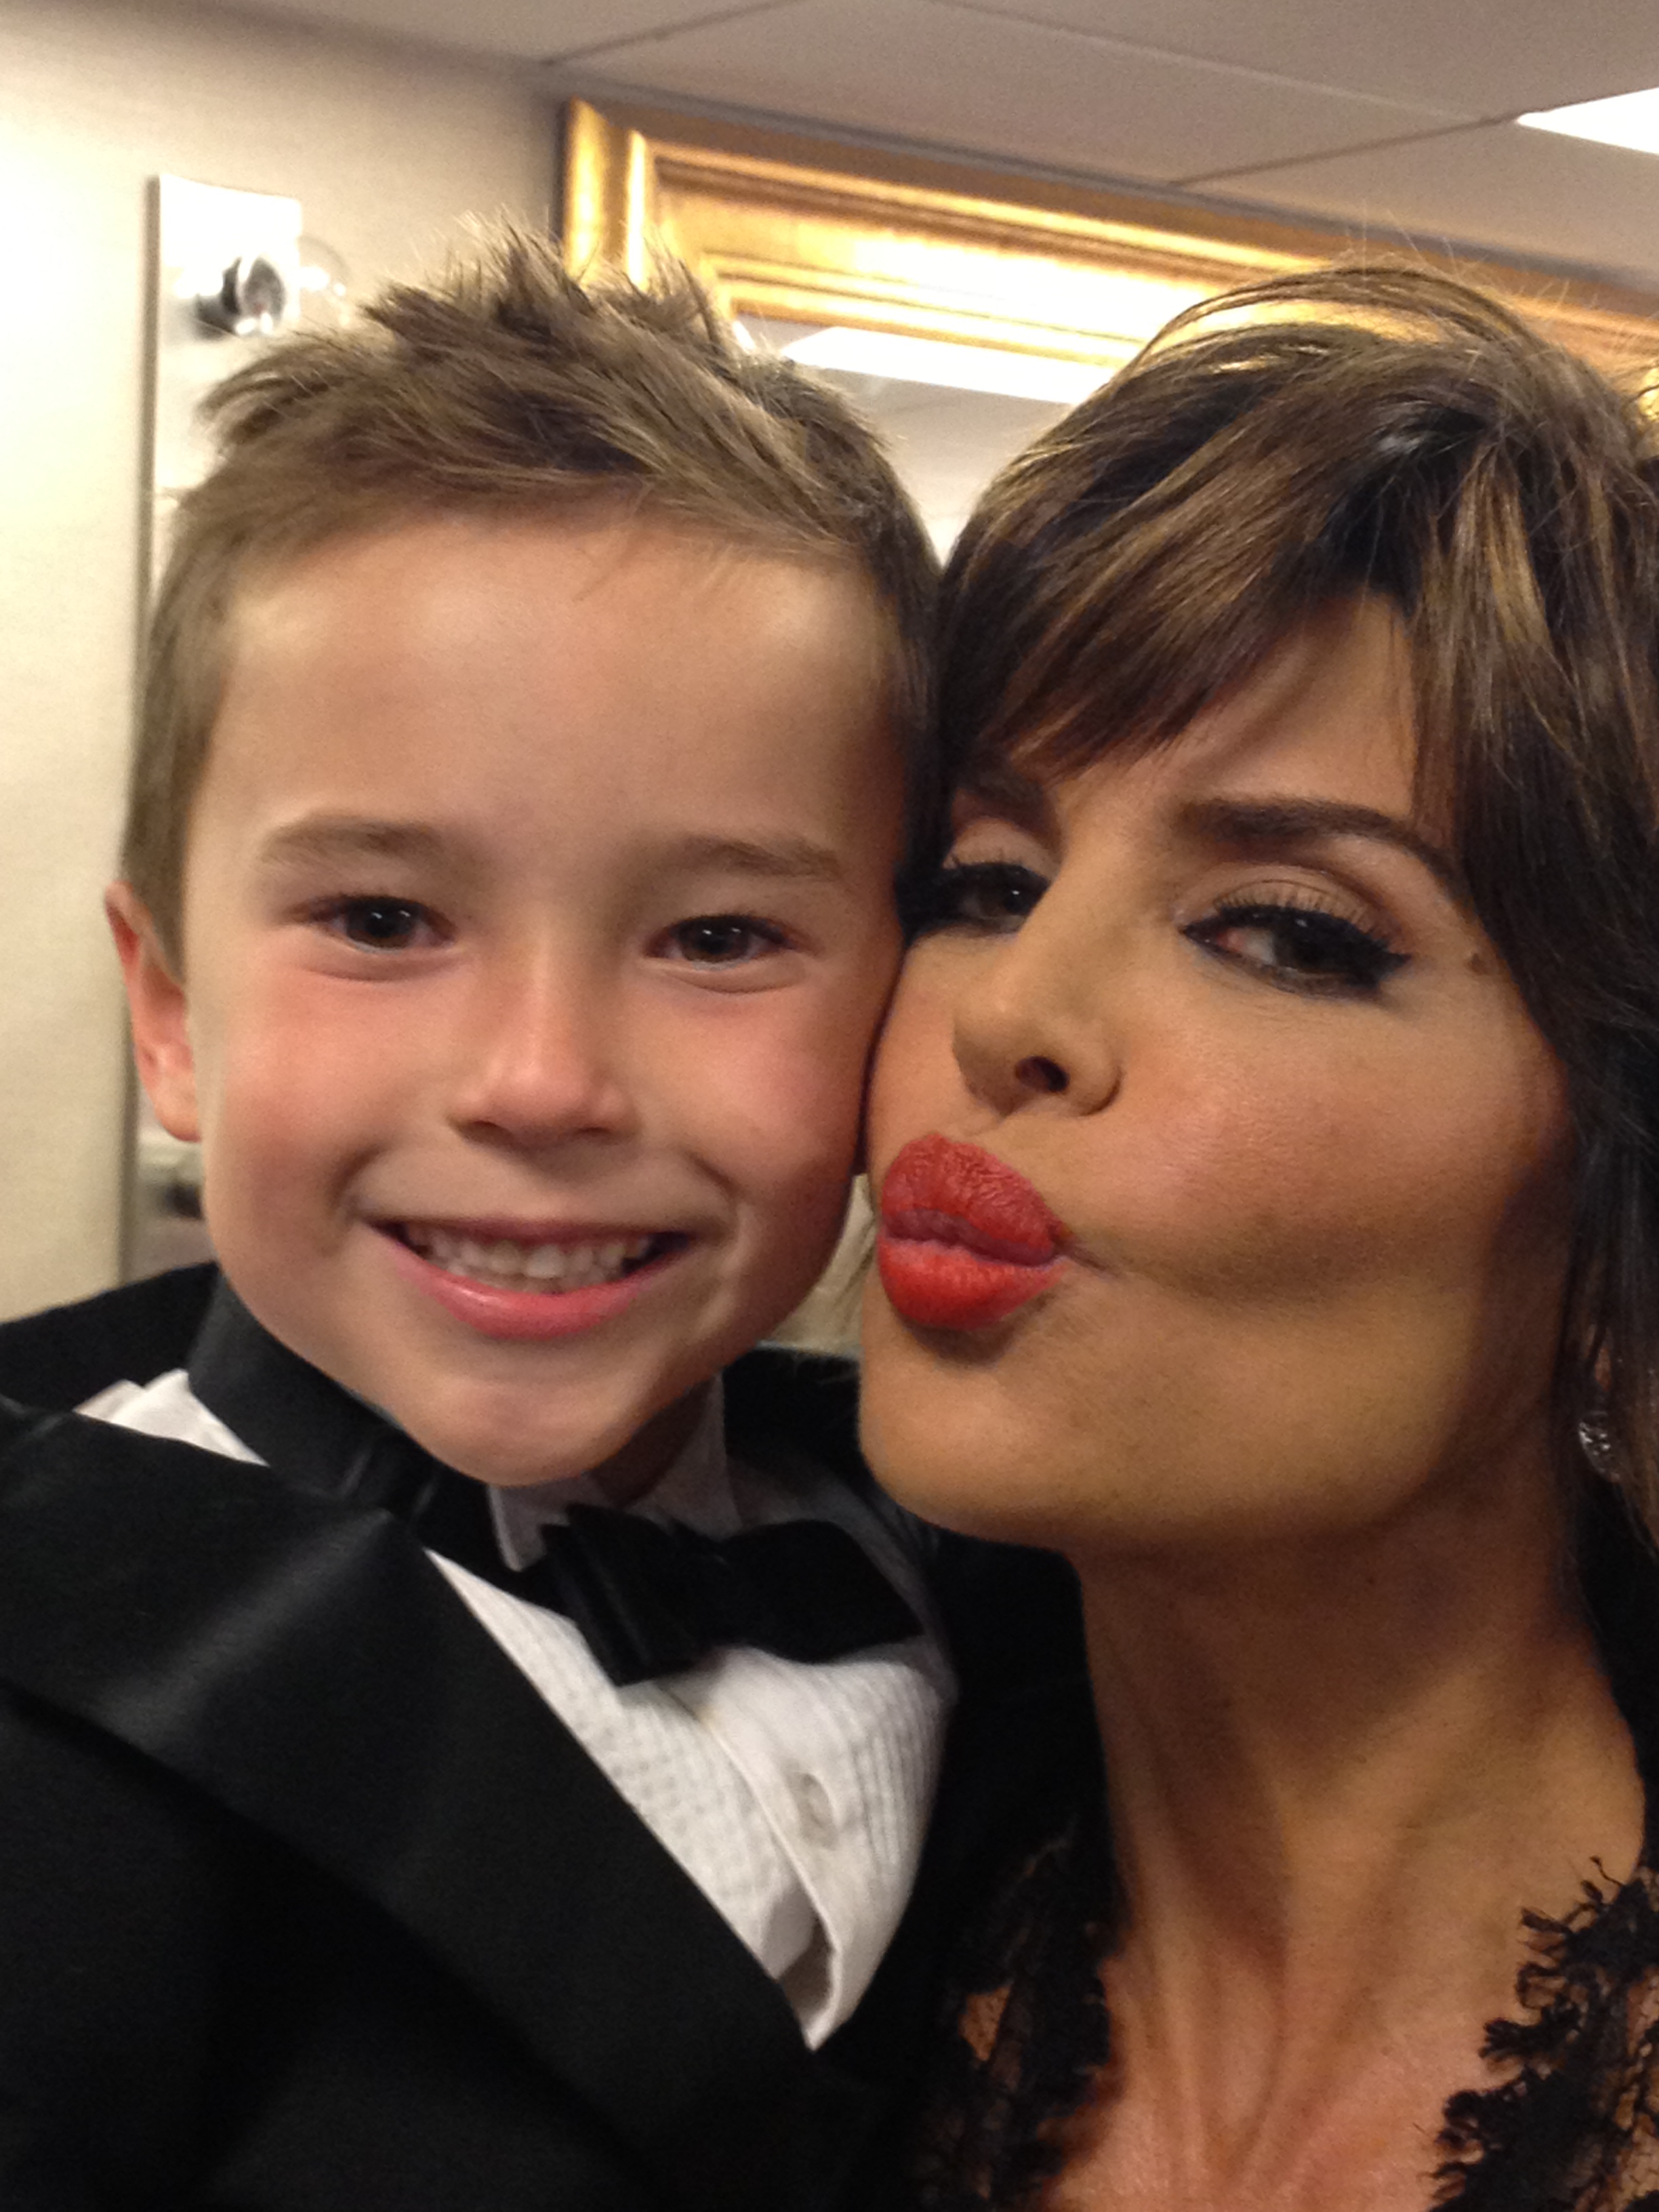 With Lisa Rinna at the Daytime Emmy Awards